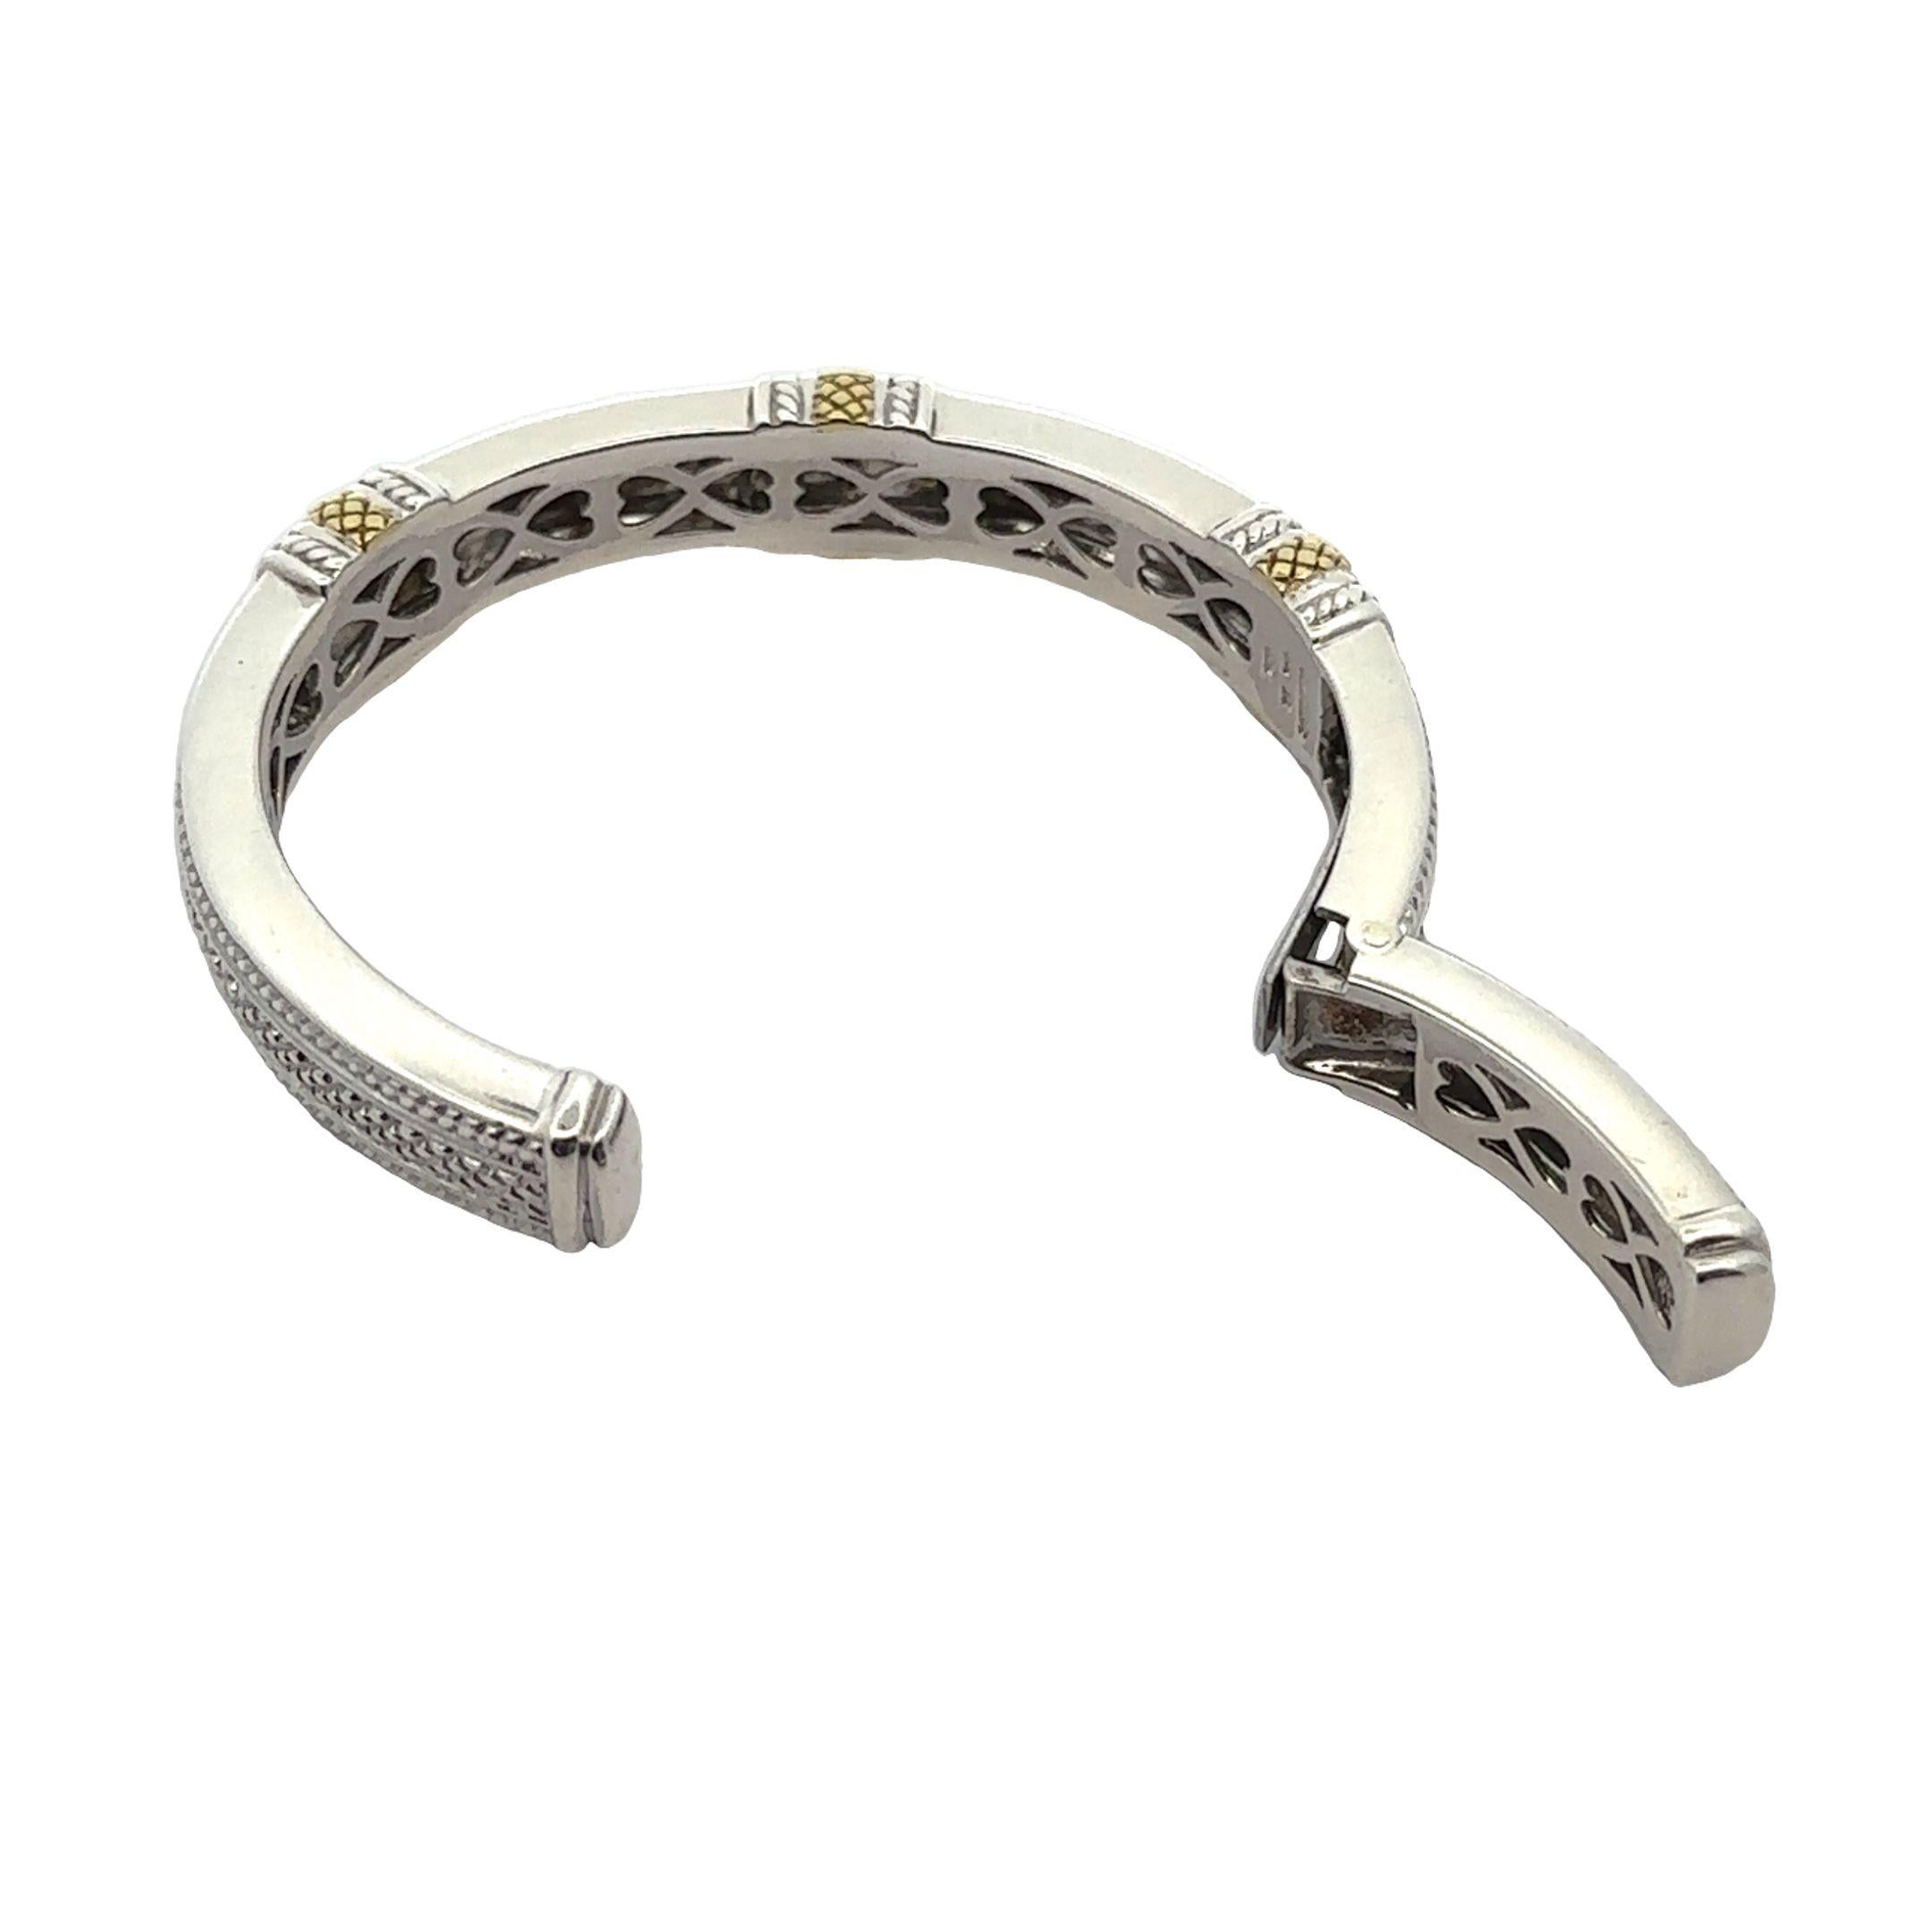 Sterling Silver Diamond Judith Ripka Twisted Rope Design Cuff Bangle Bracelet For Sale 6